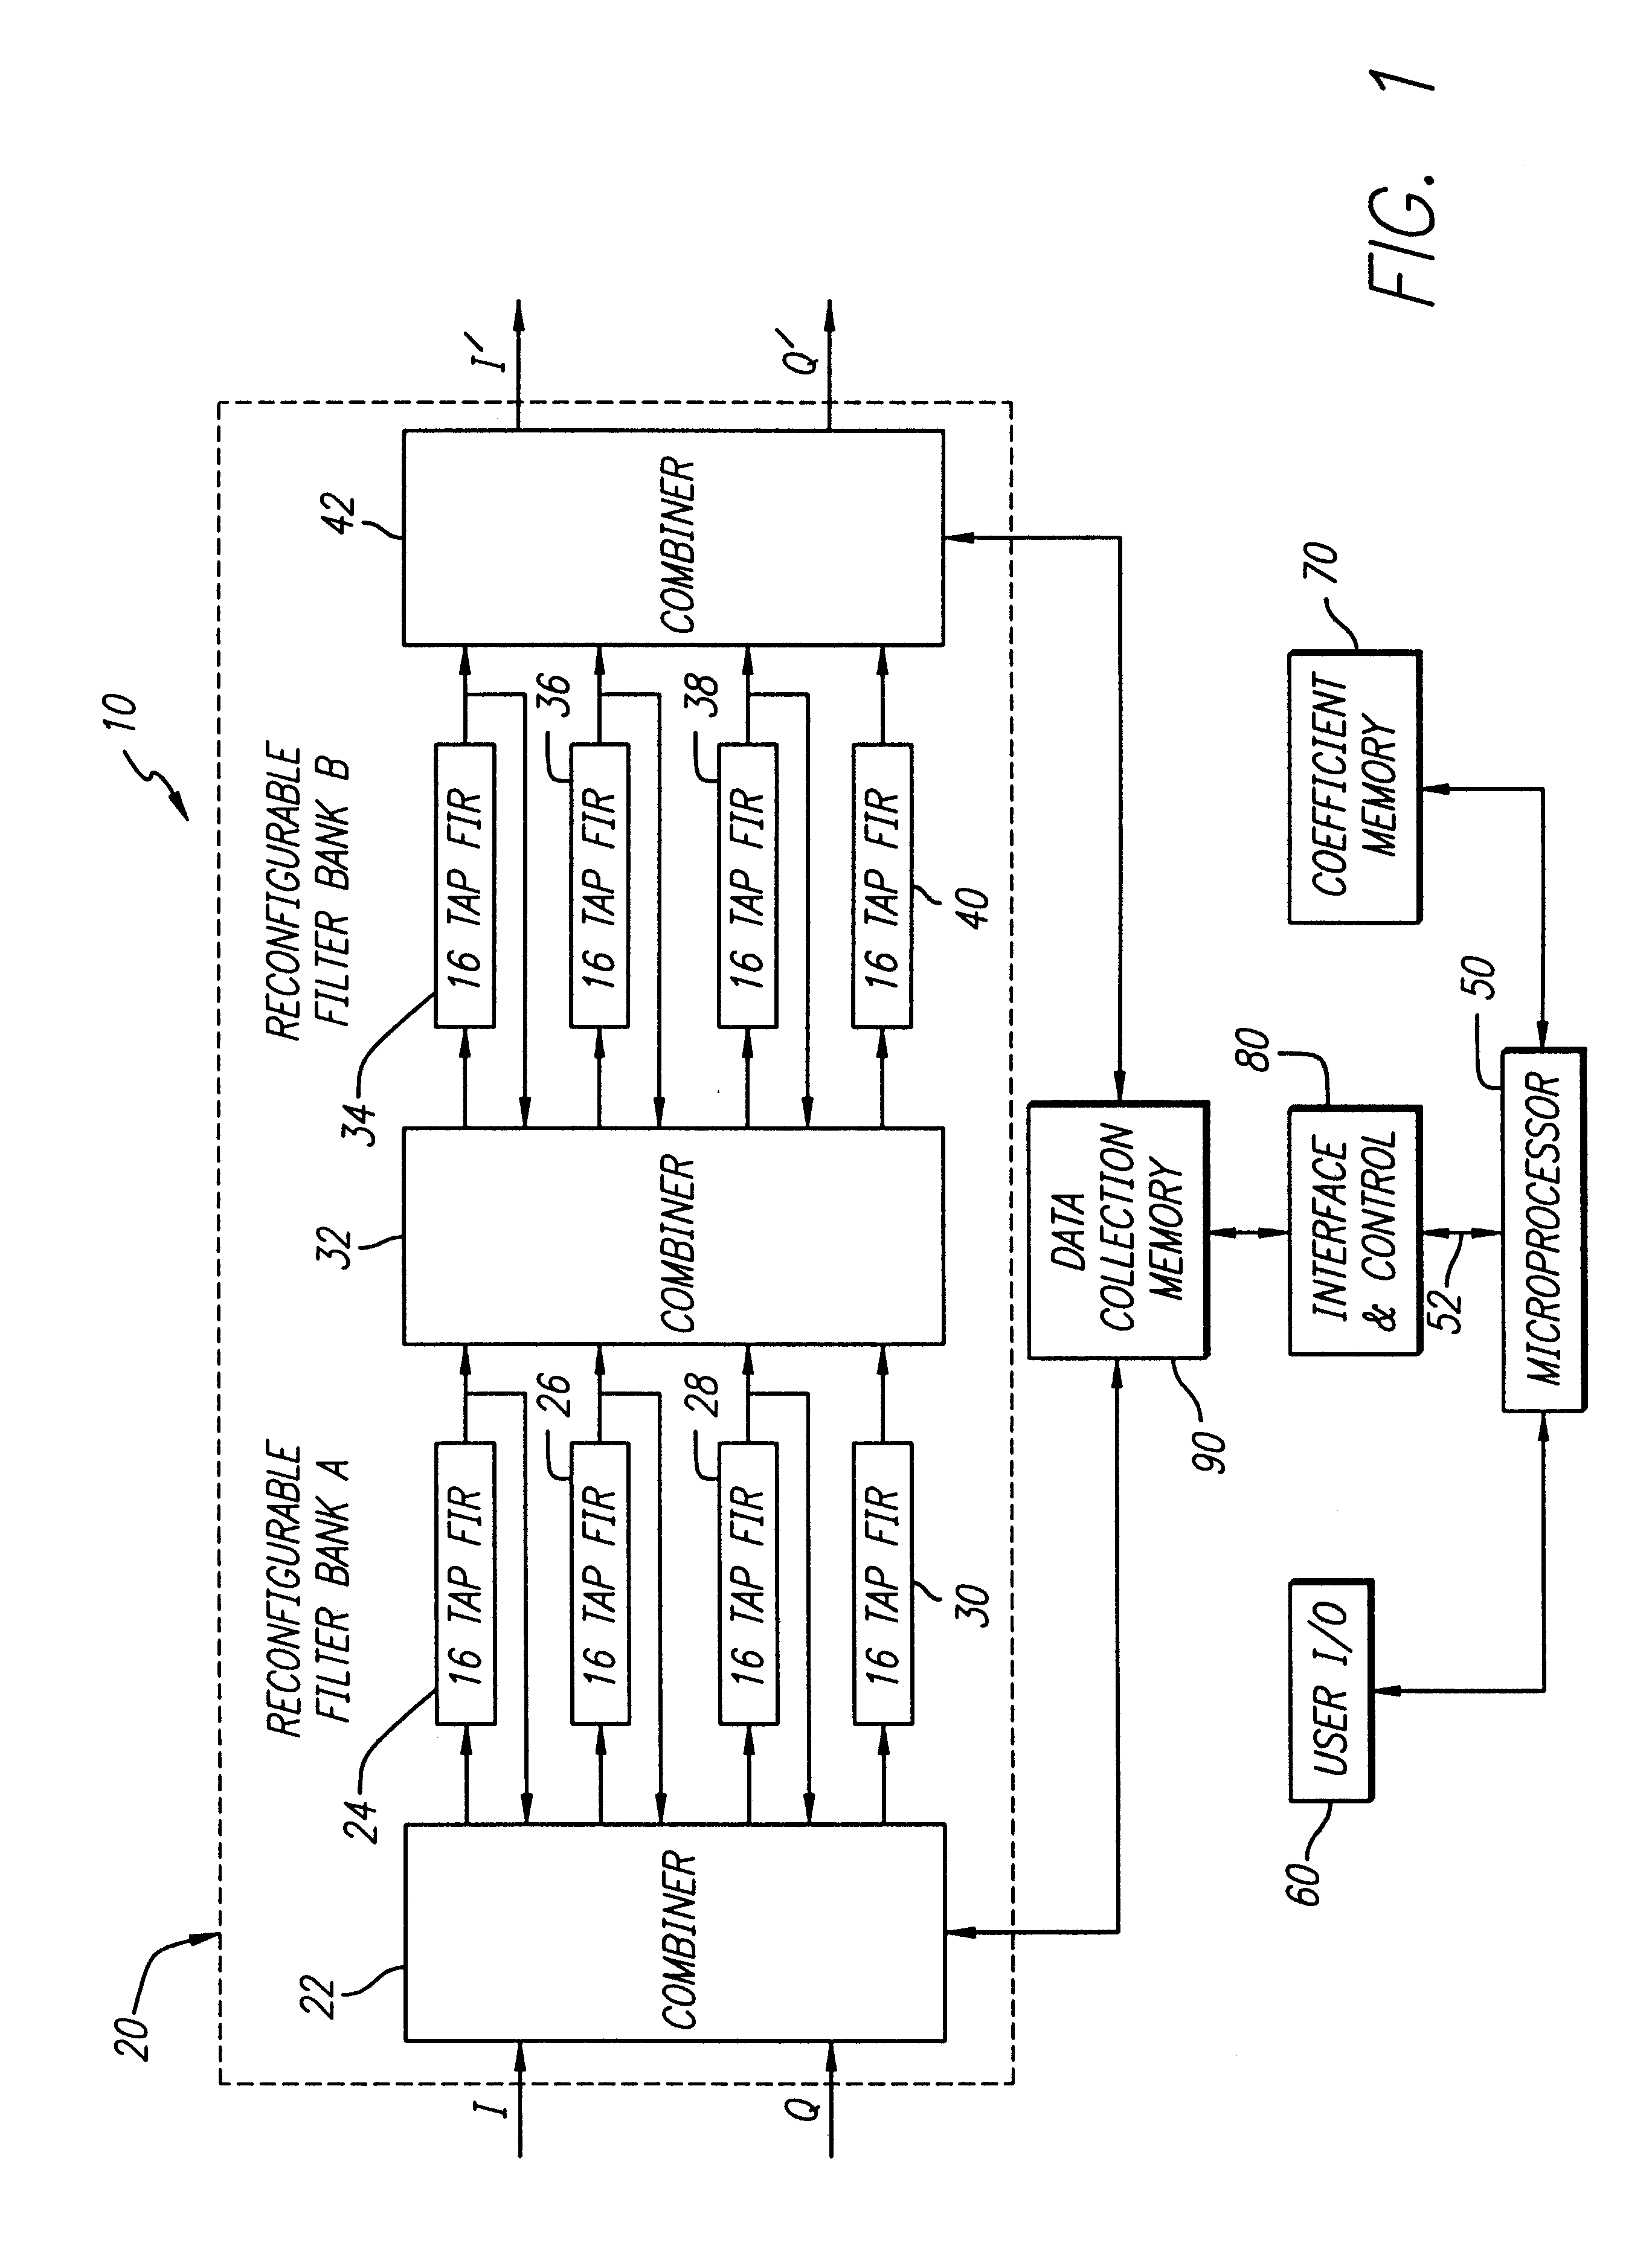 Equalization system using general purpose filter architecture